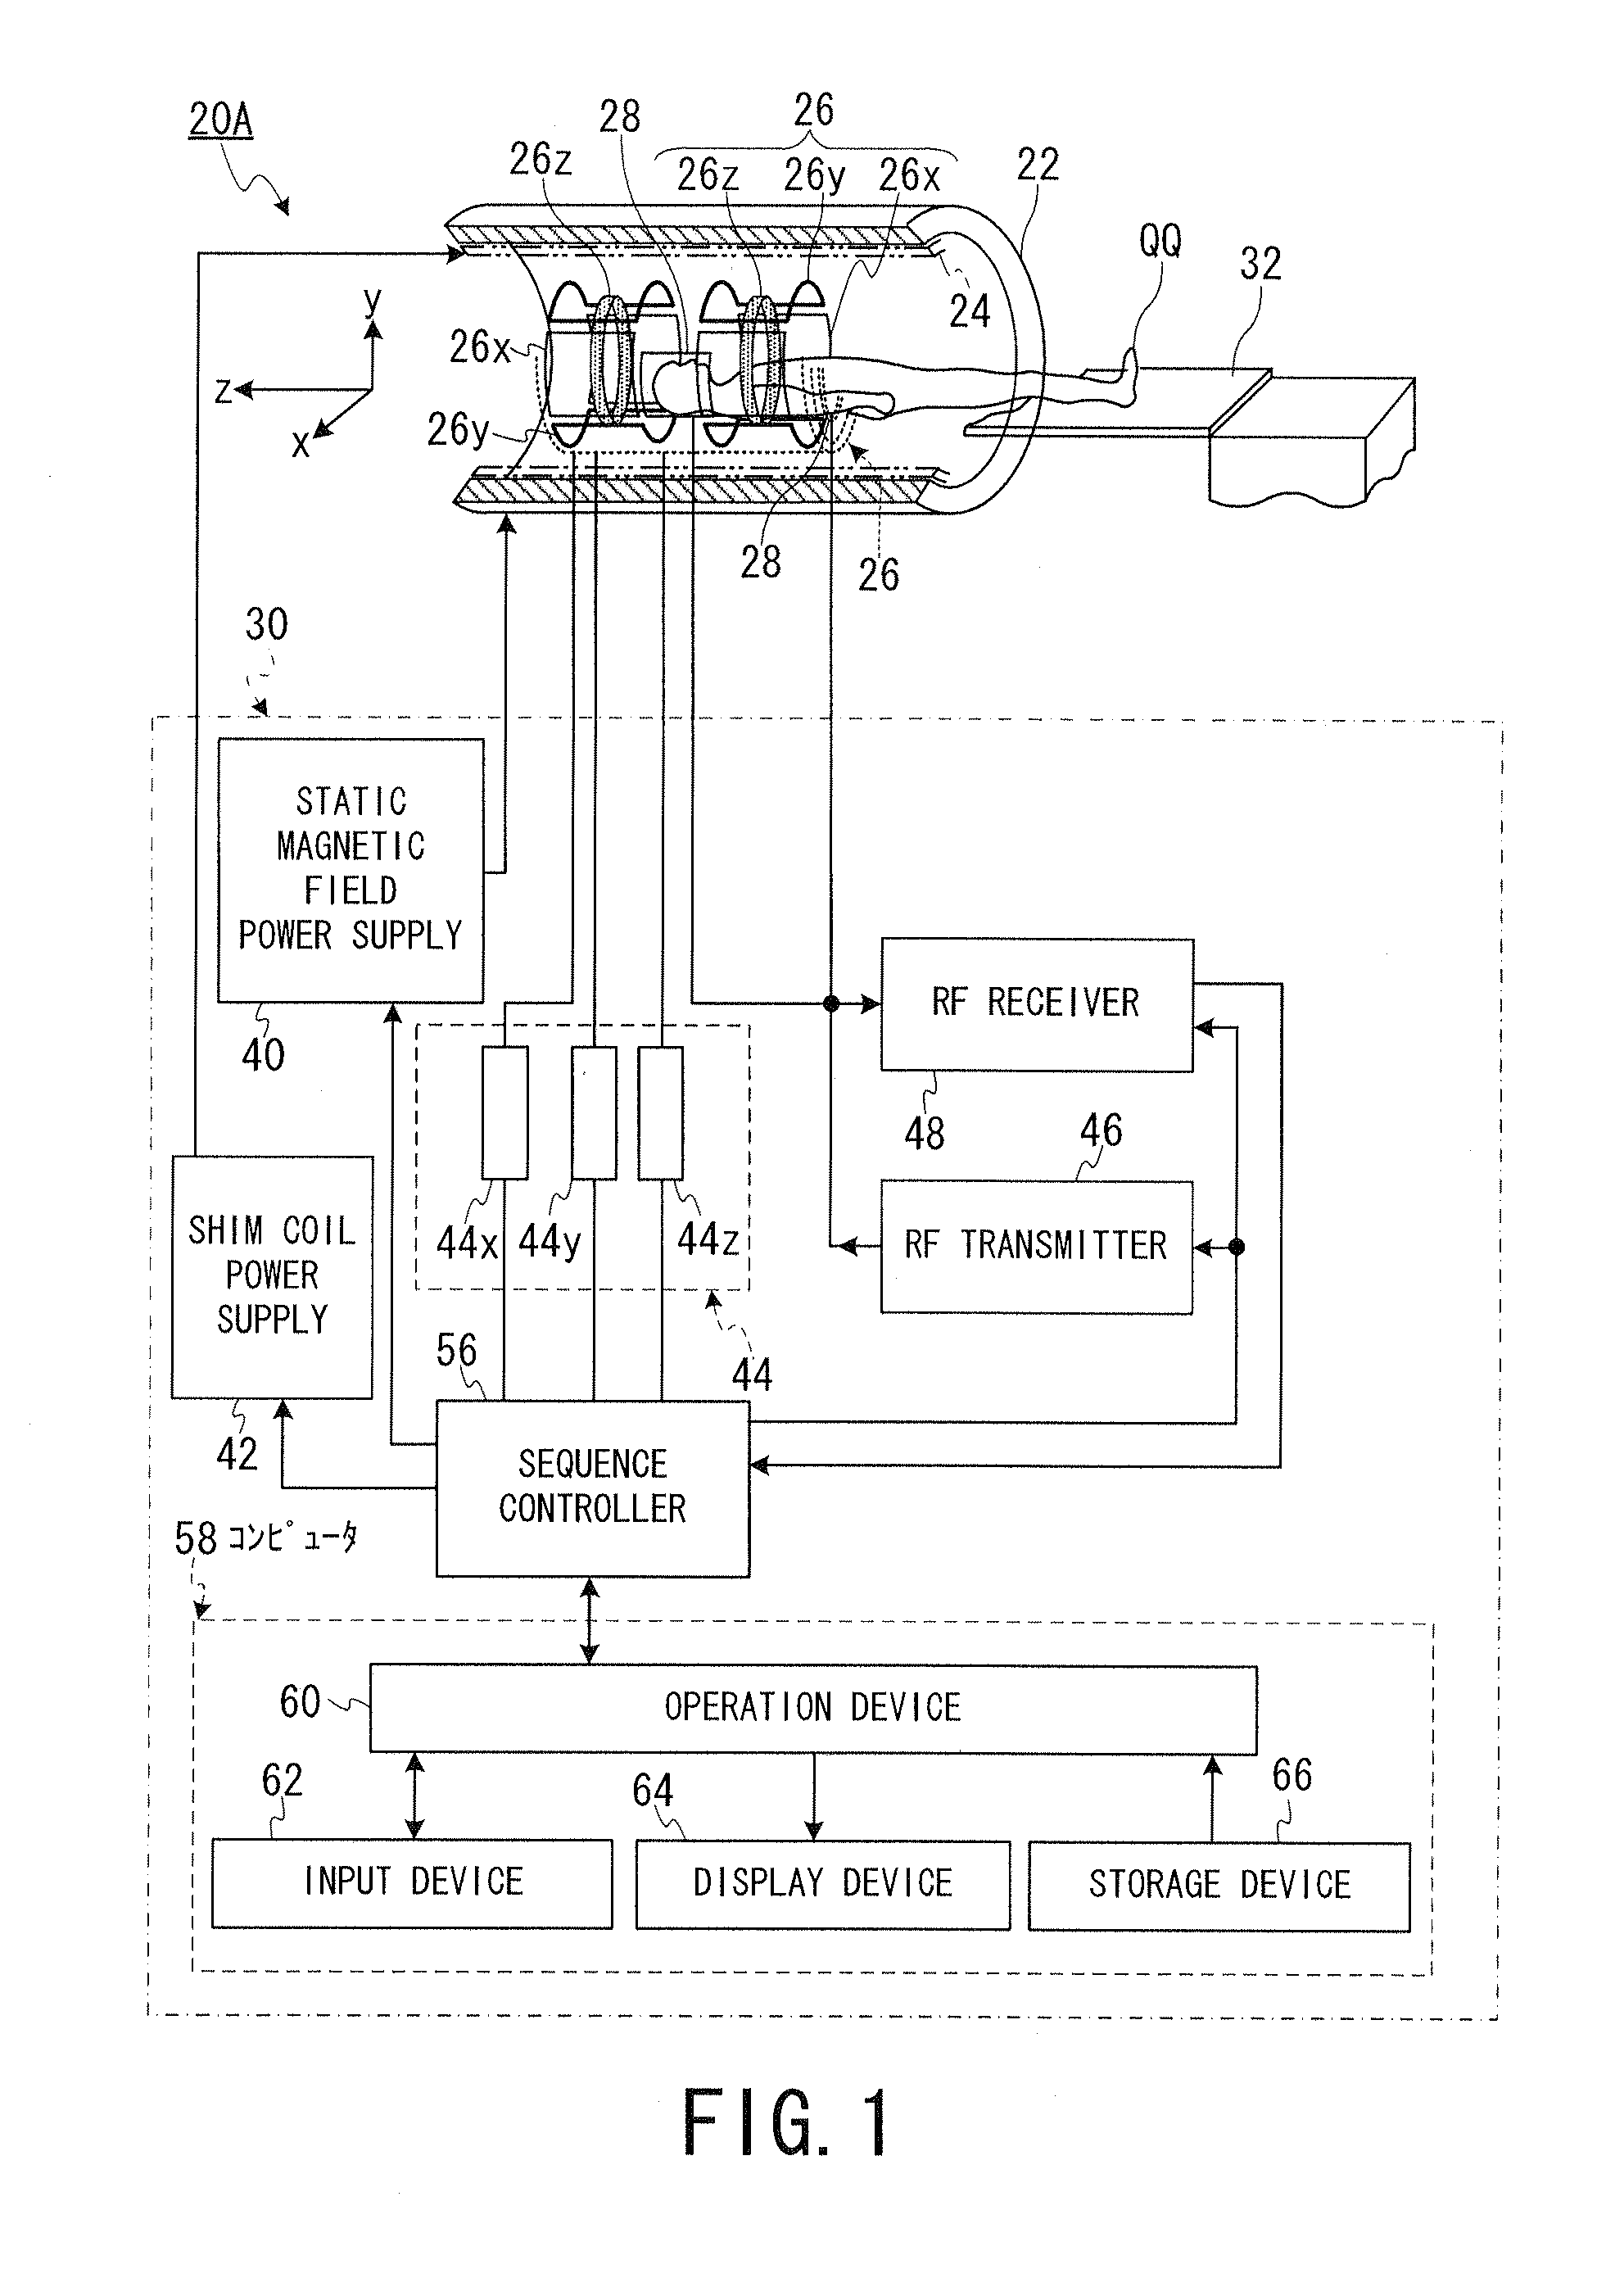 Magnetic resonance imaging apparatus and control device of a magnetic resonance imaging apparatus